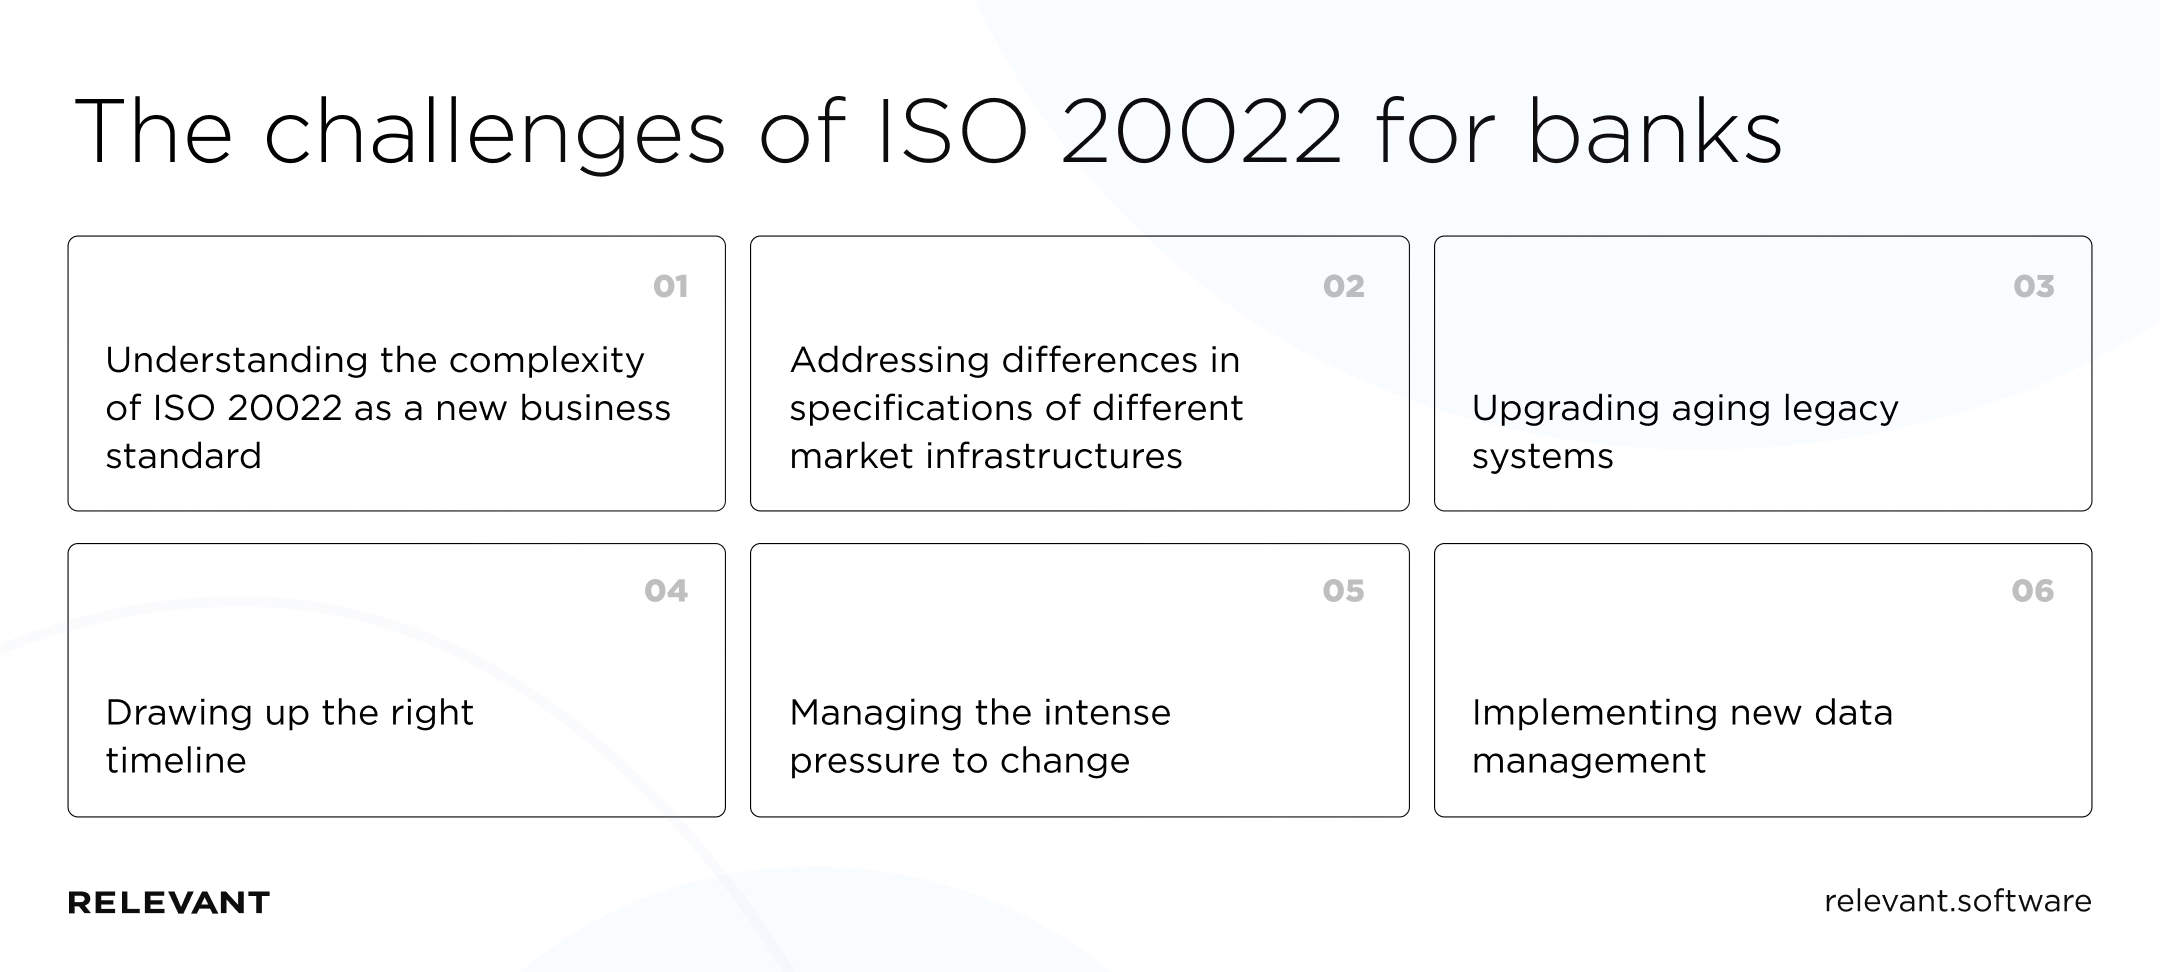 The chellenges of ISO 20022 for banks